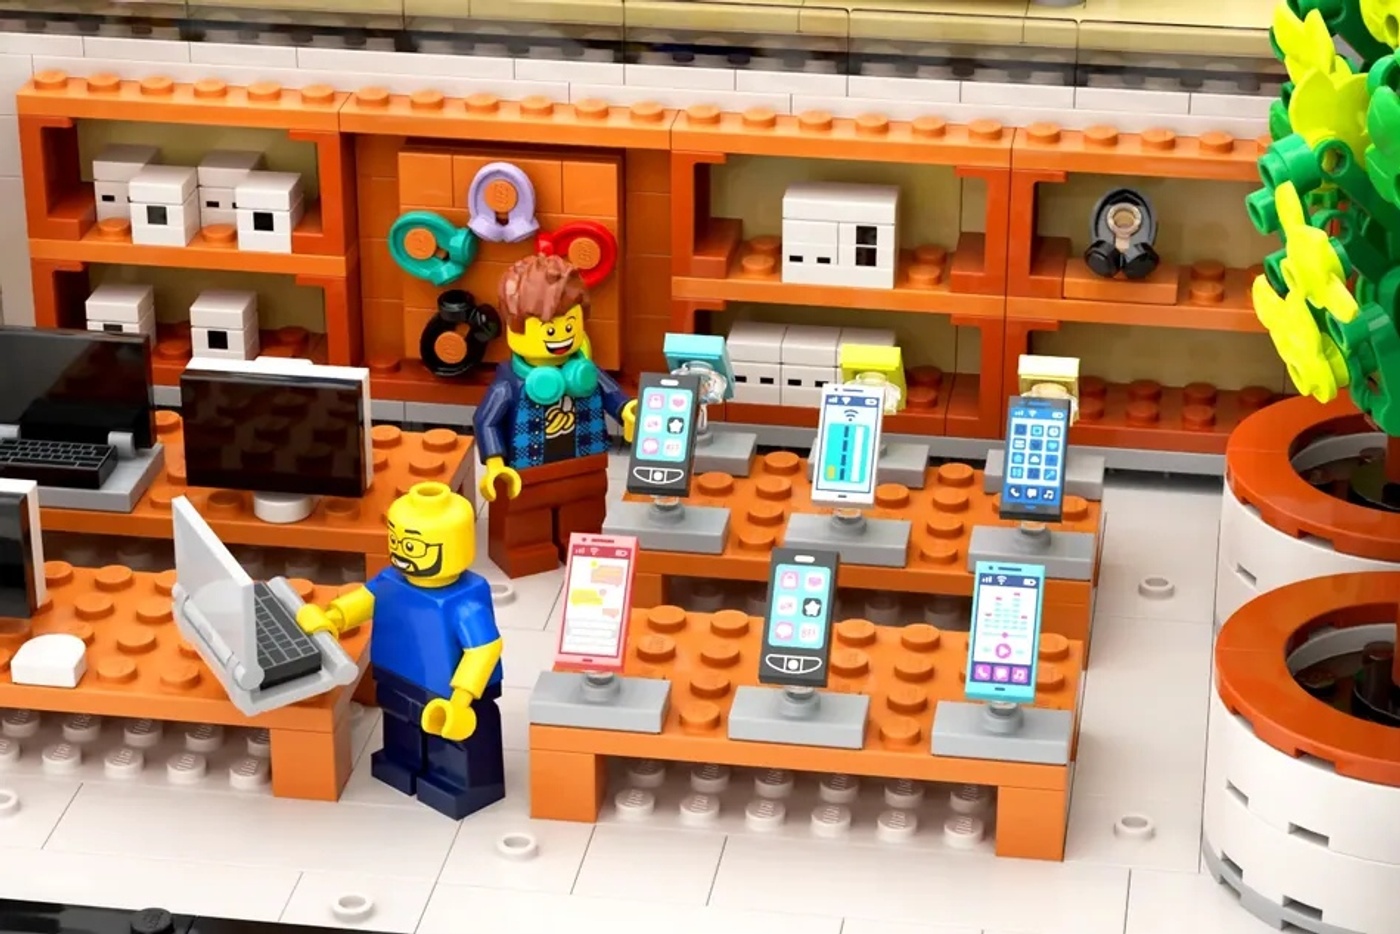 New LEGO Set: Apple Store Concept, Fully Equipped From iPhones to Employees!